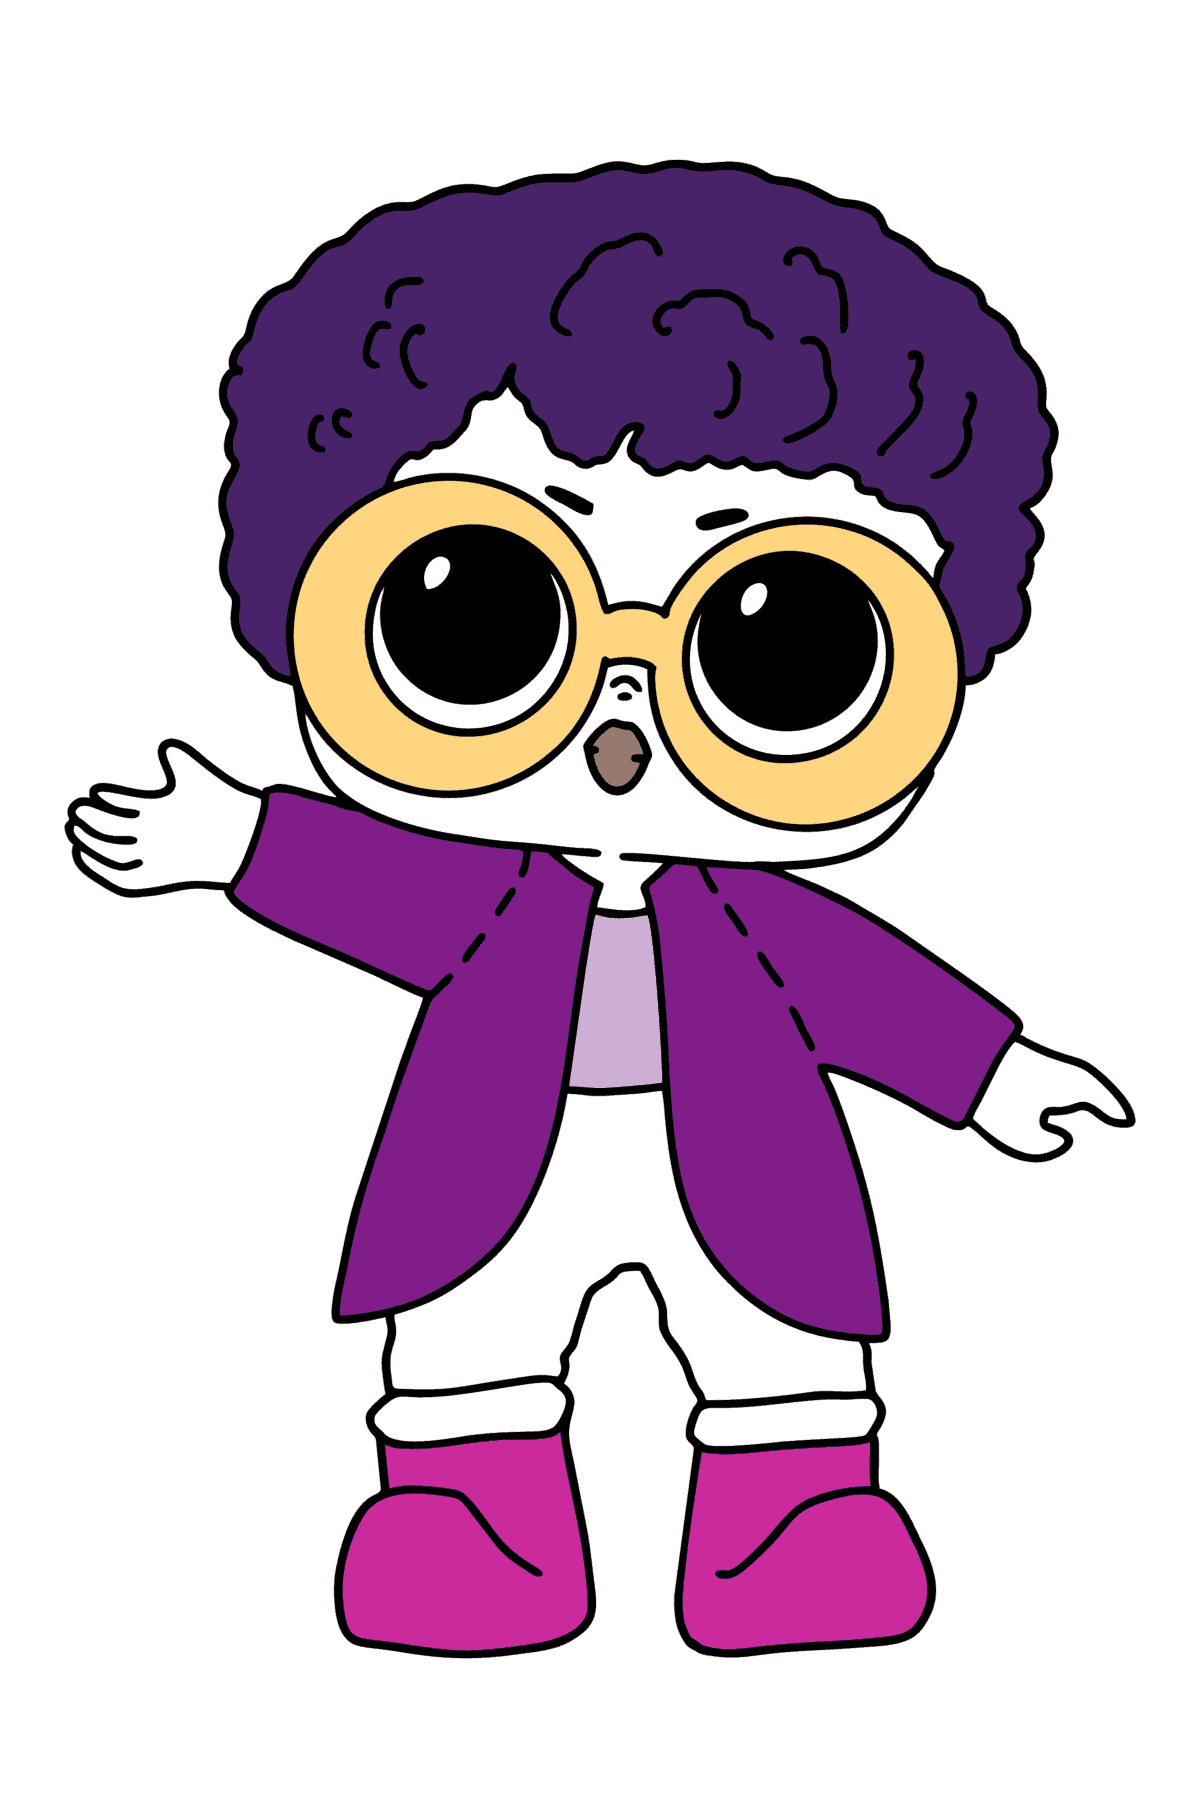 LOL Surprise Purple Reign Doll Boy coloring page - Coloring Pages for Kids